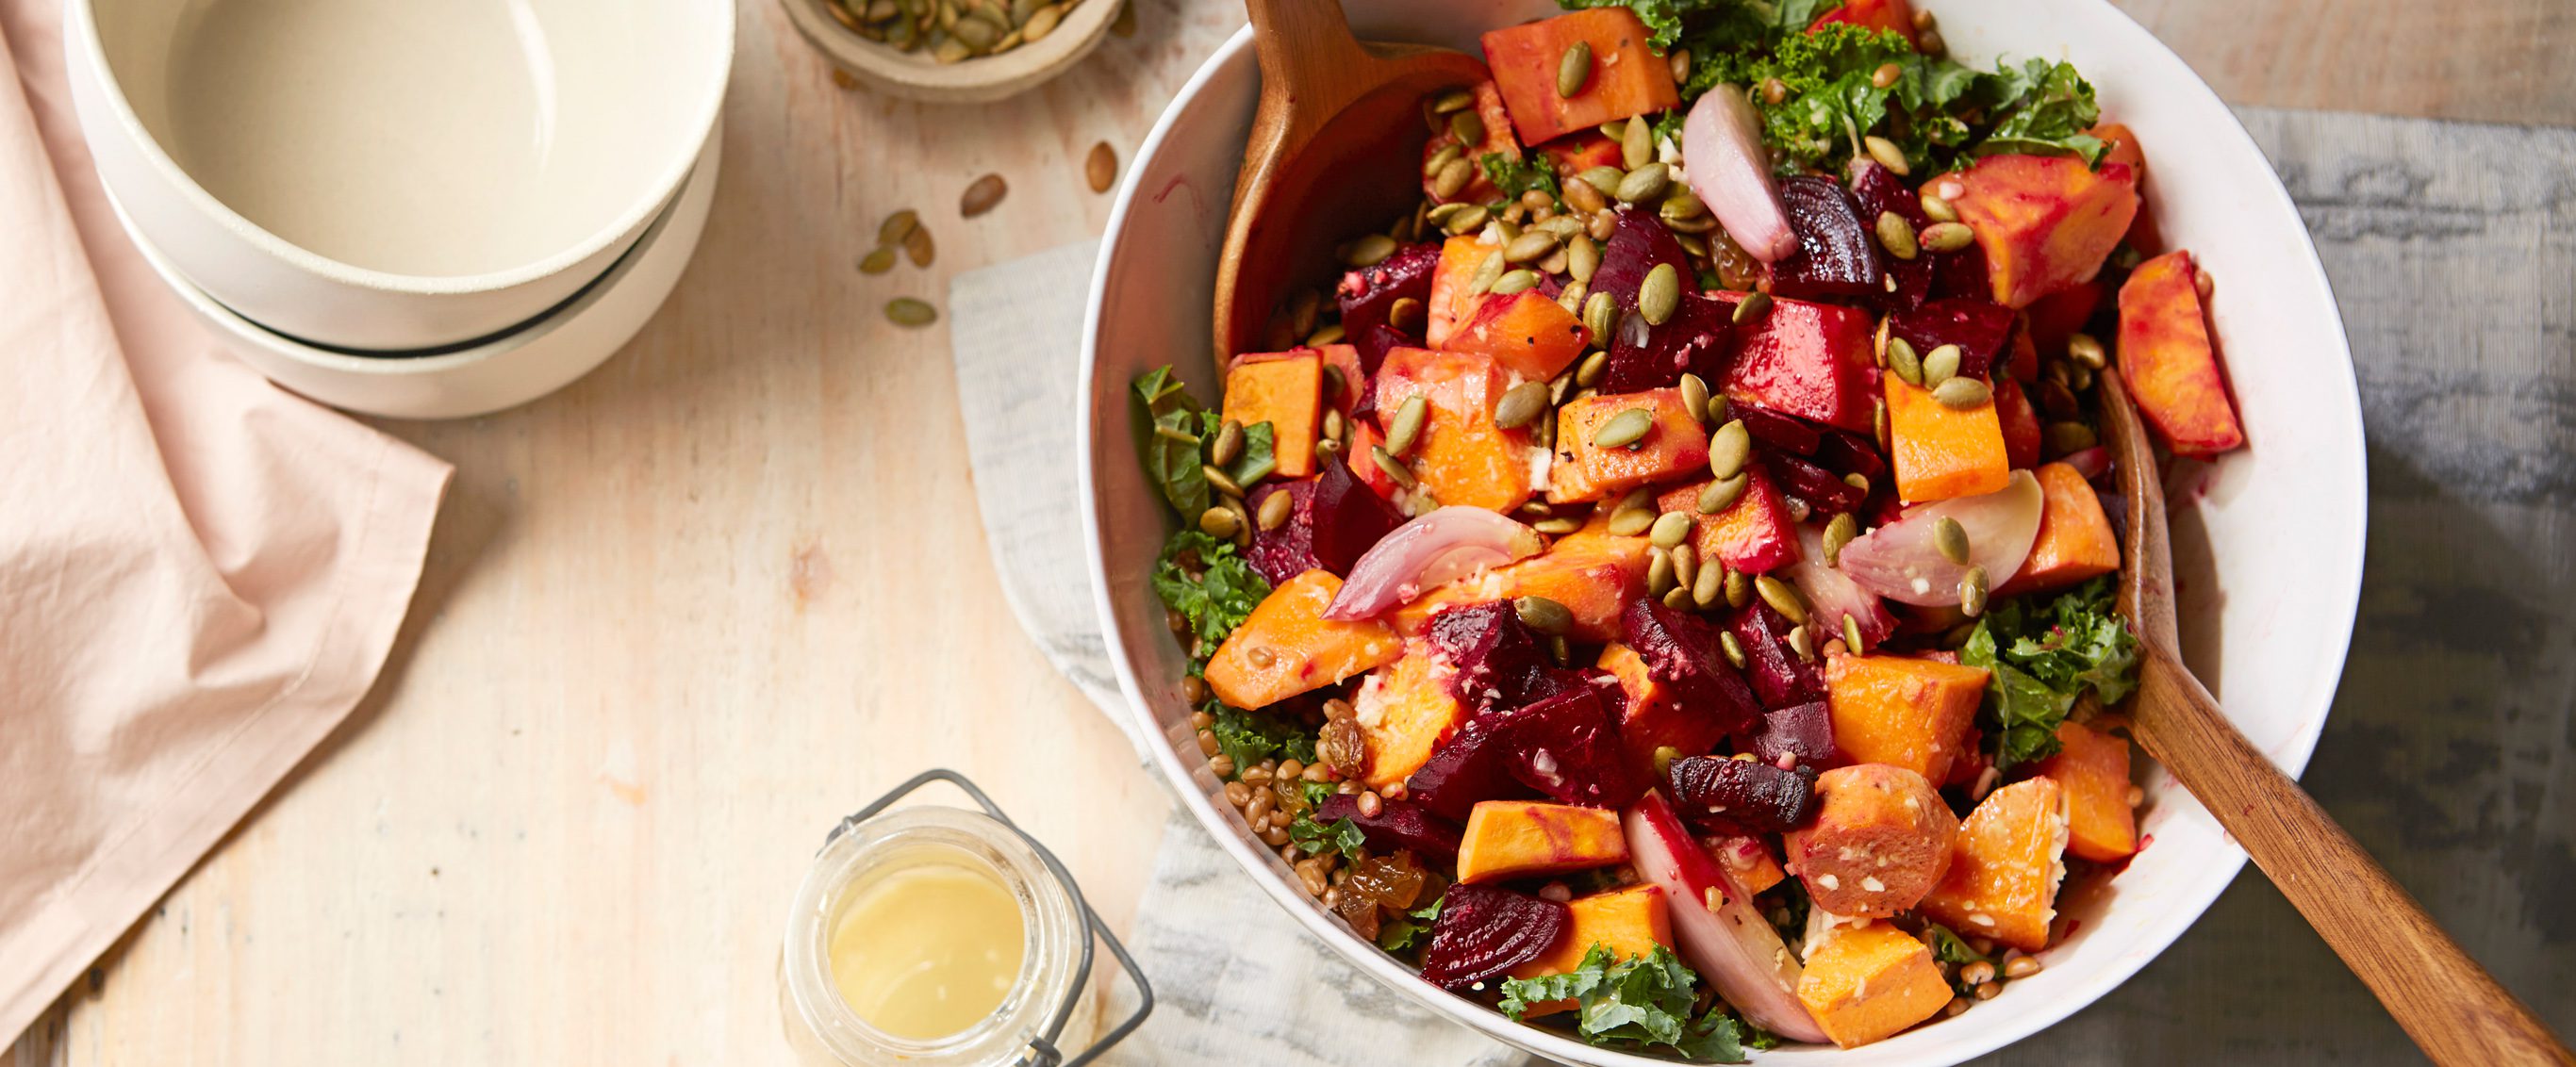 Wheat Berry and Roasted Vegetable Salad with Kale for Wordpress